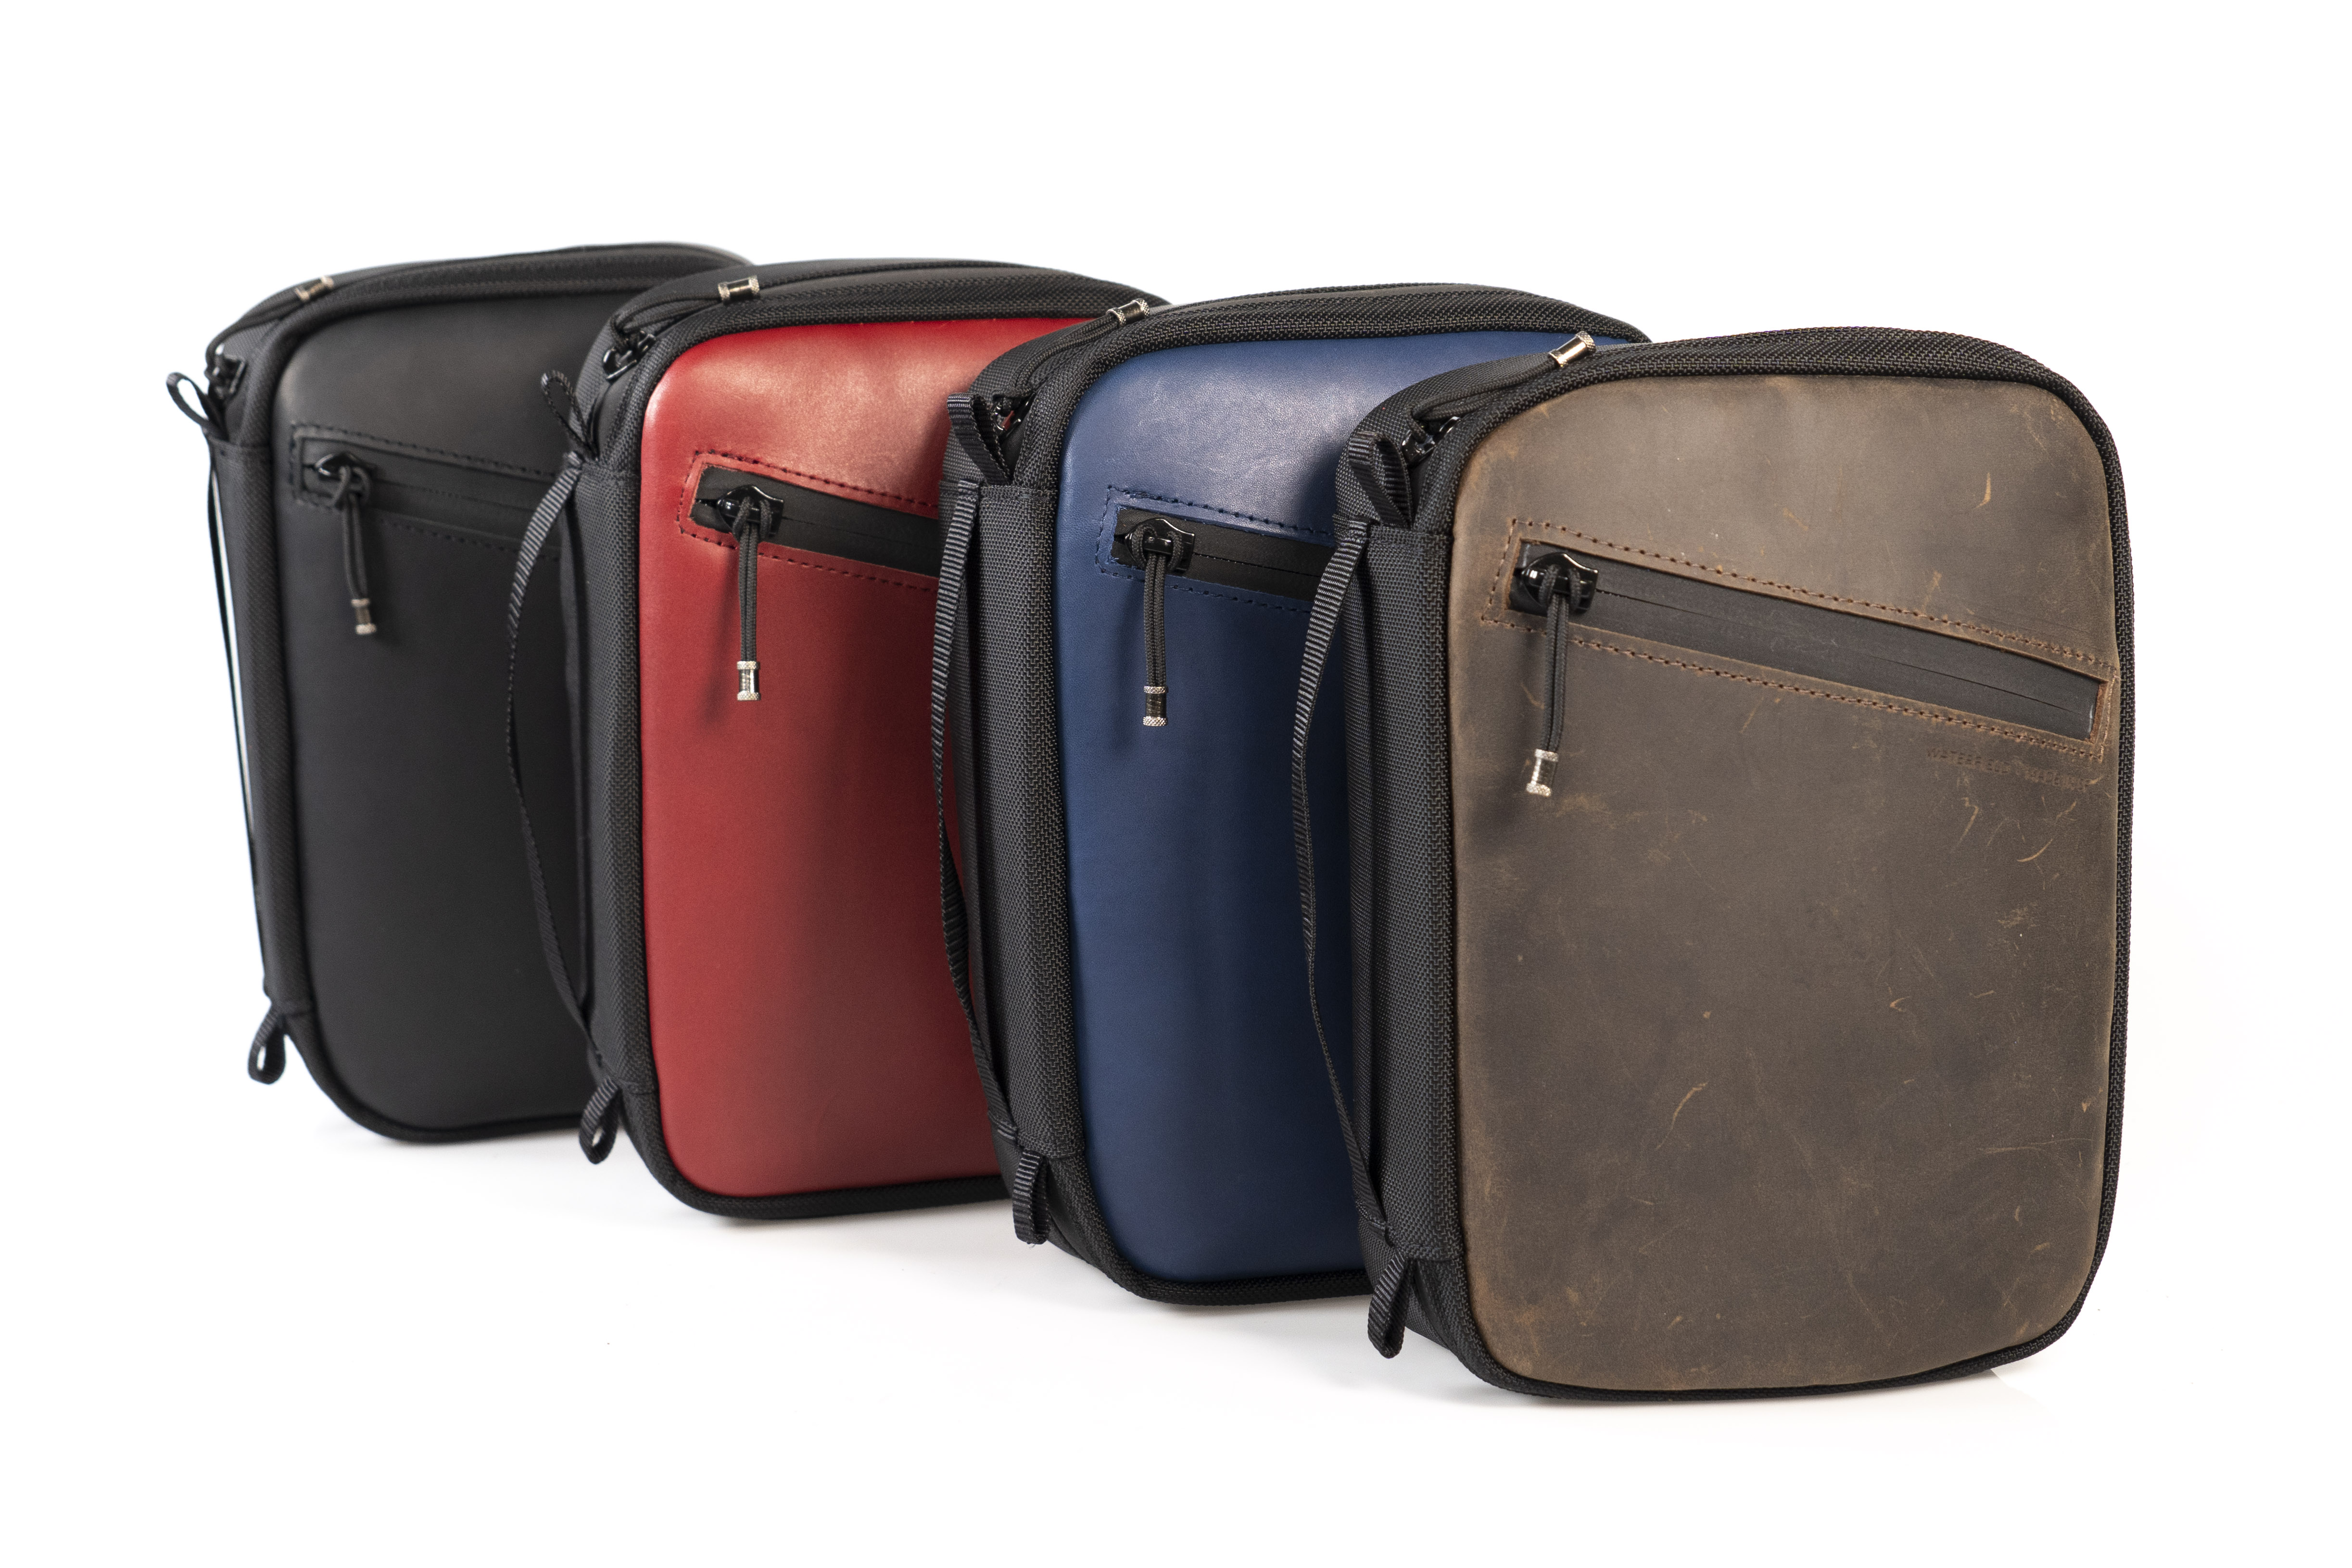 New WaterField Developer’s Gear Case Protects Both Bulky and Small Tech Accessories in Transit